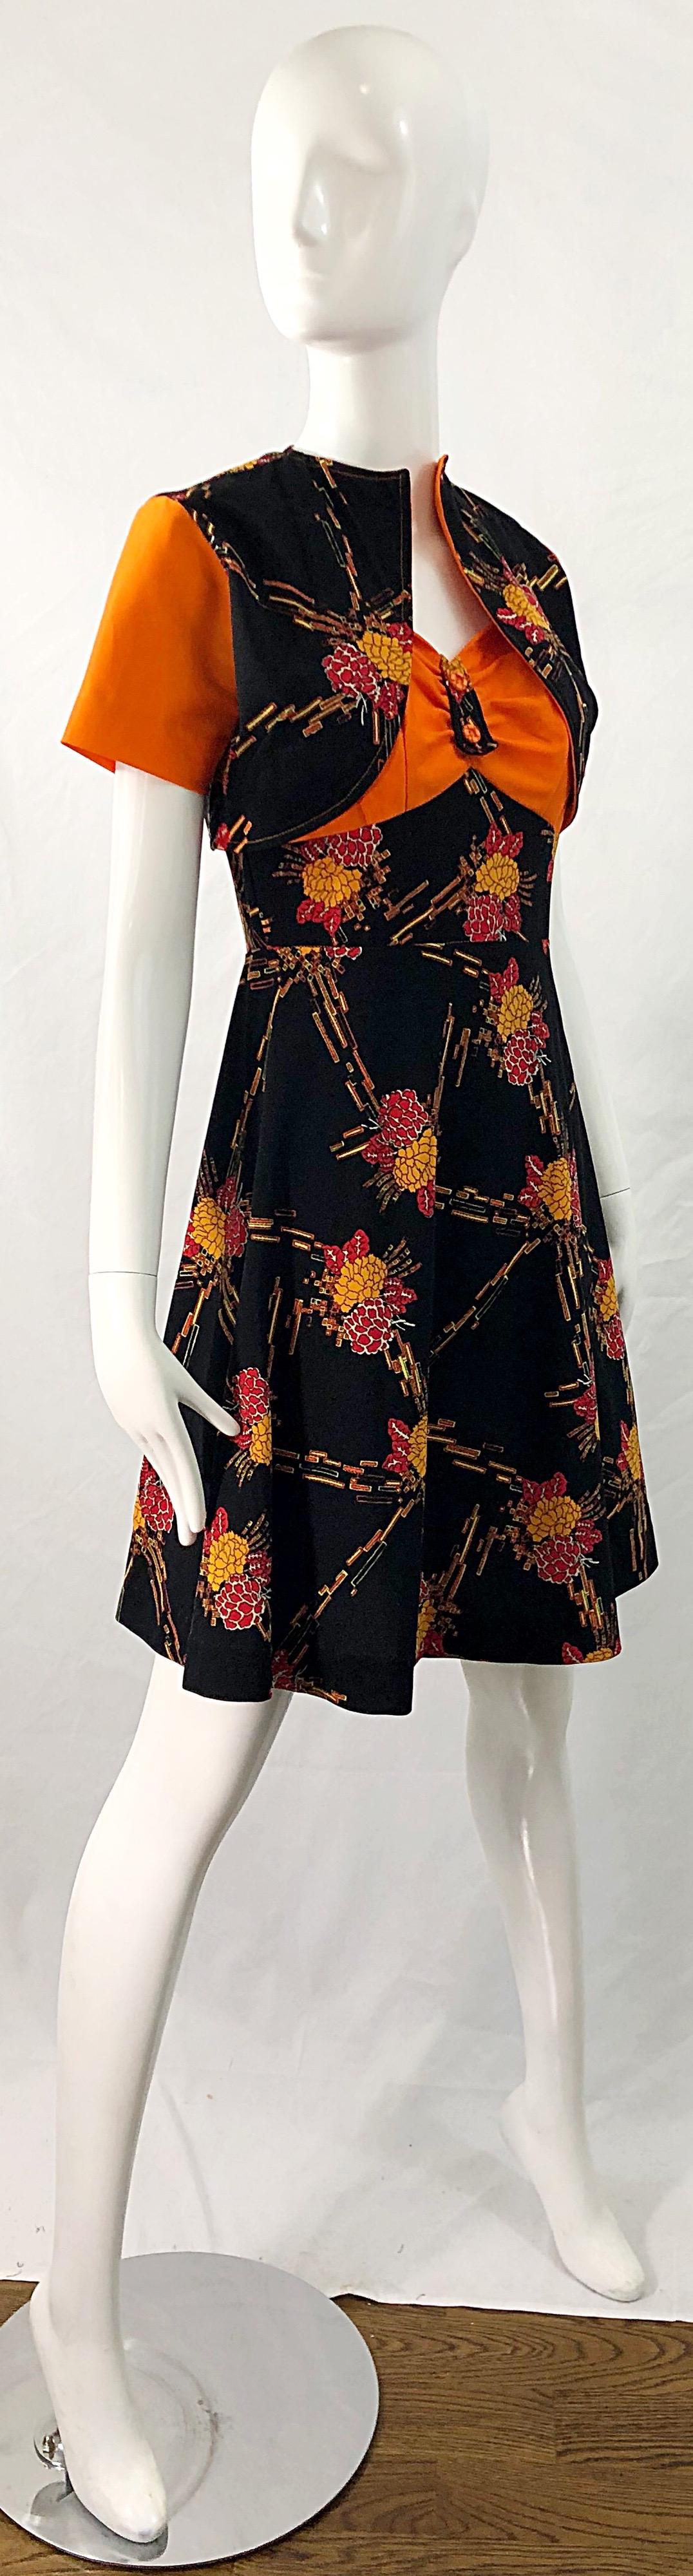 1970s Autumnal Digital Floral Print Knit Vintage 70s A Line Dress + Bolero Top In Excellent Condition For Sale In San Diego, CA